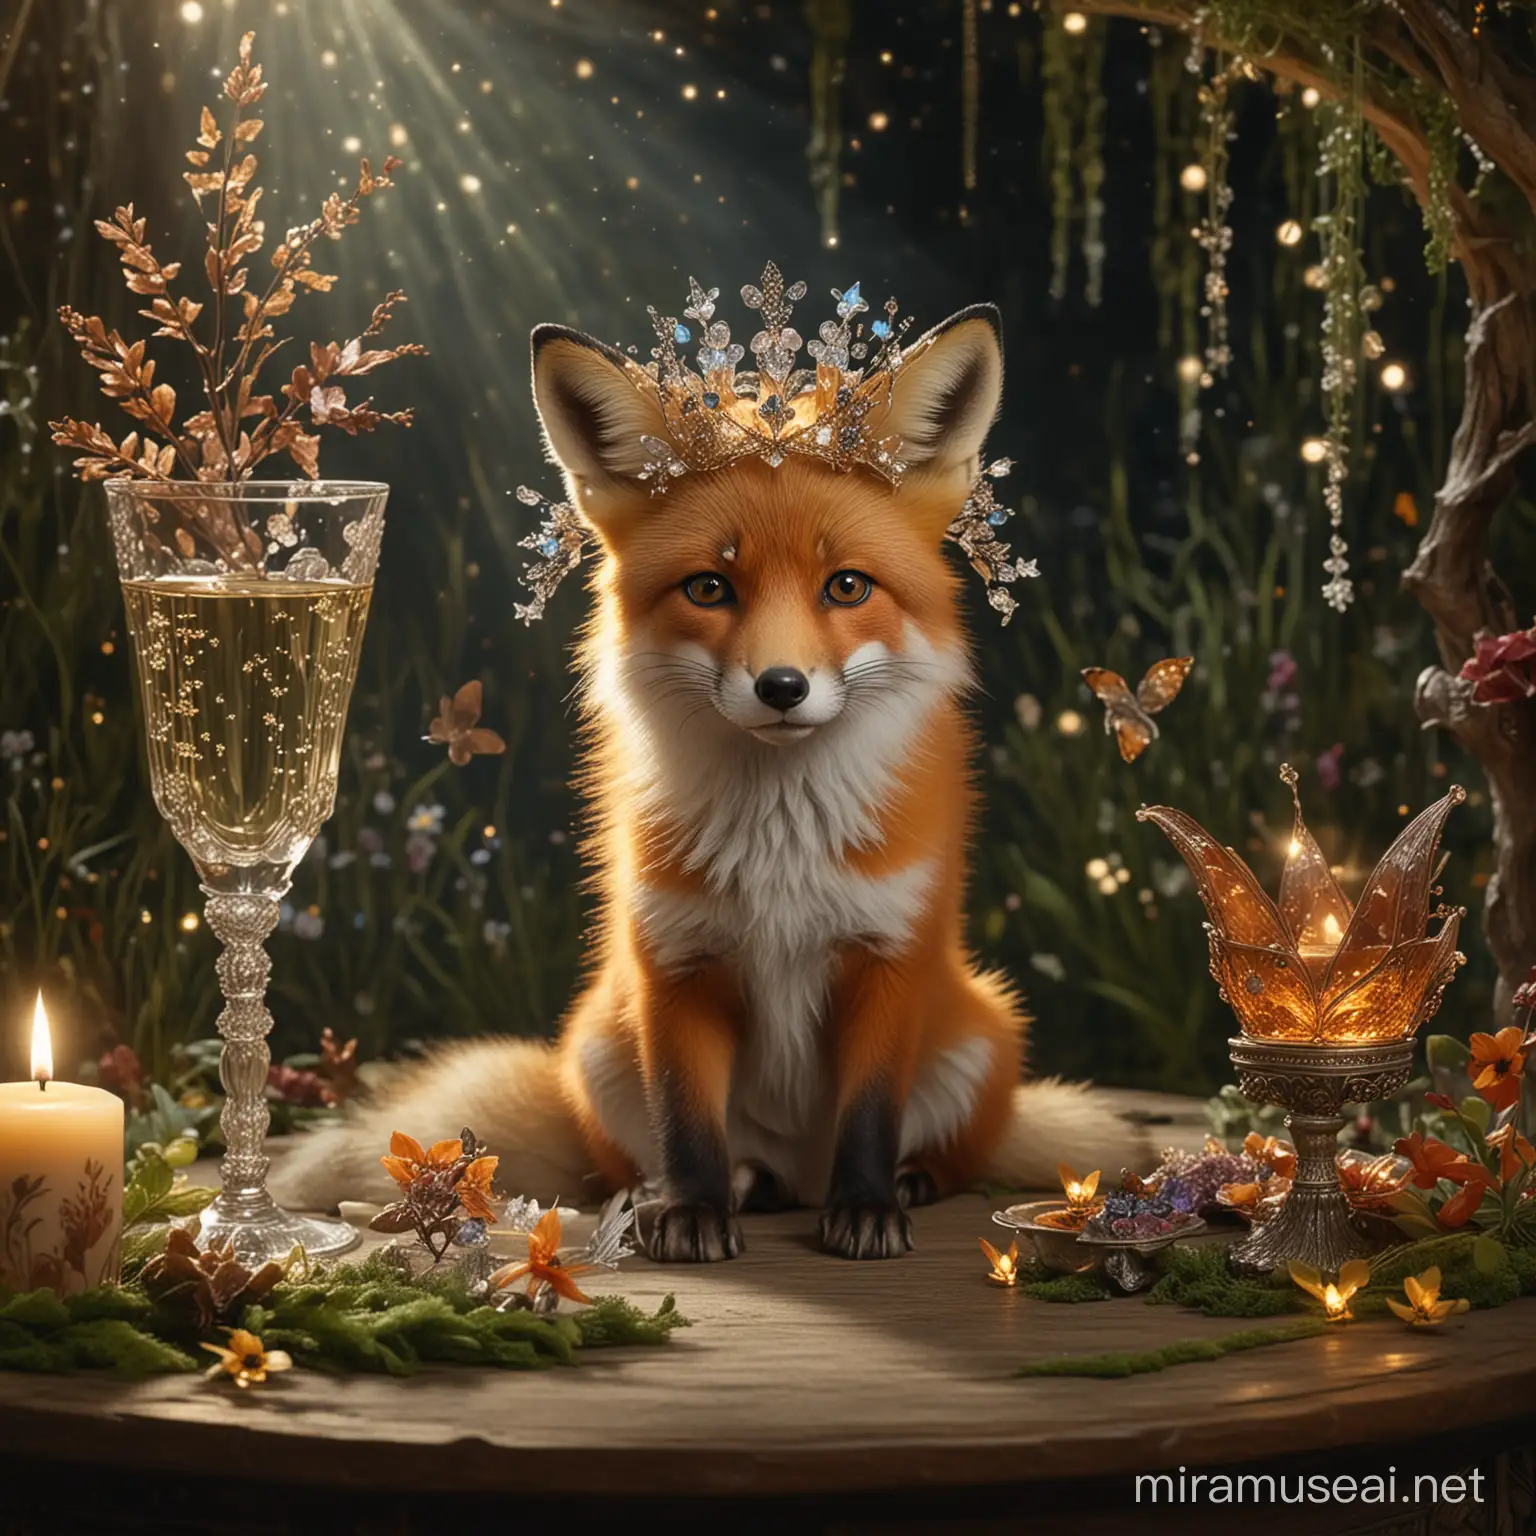 Fox with Exquisite Headdress in Enchanted Tea Setting